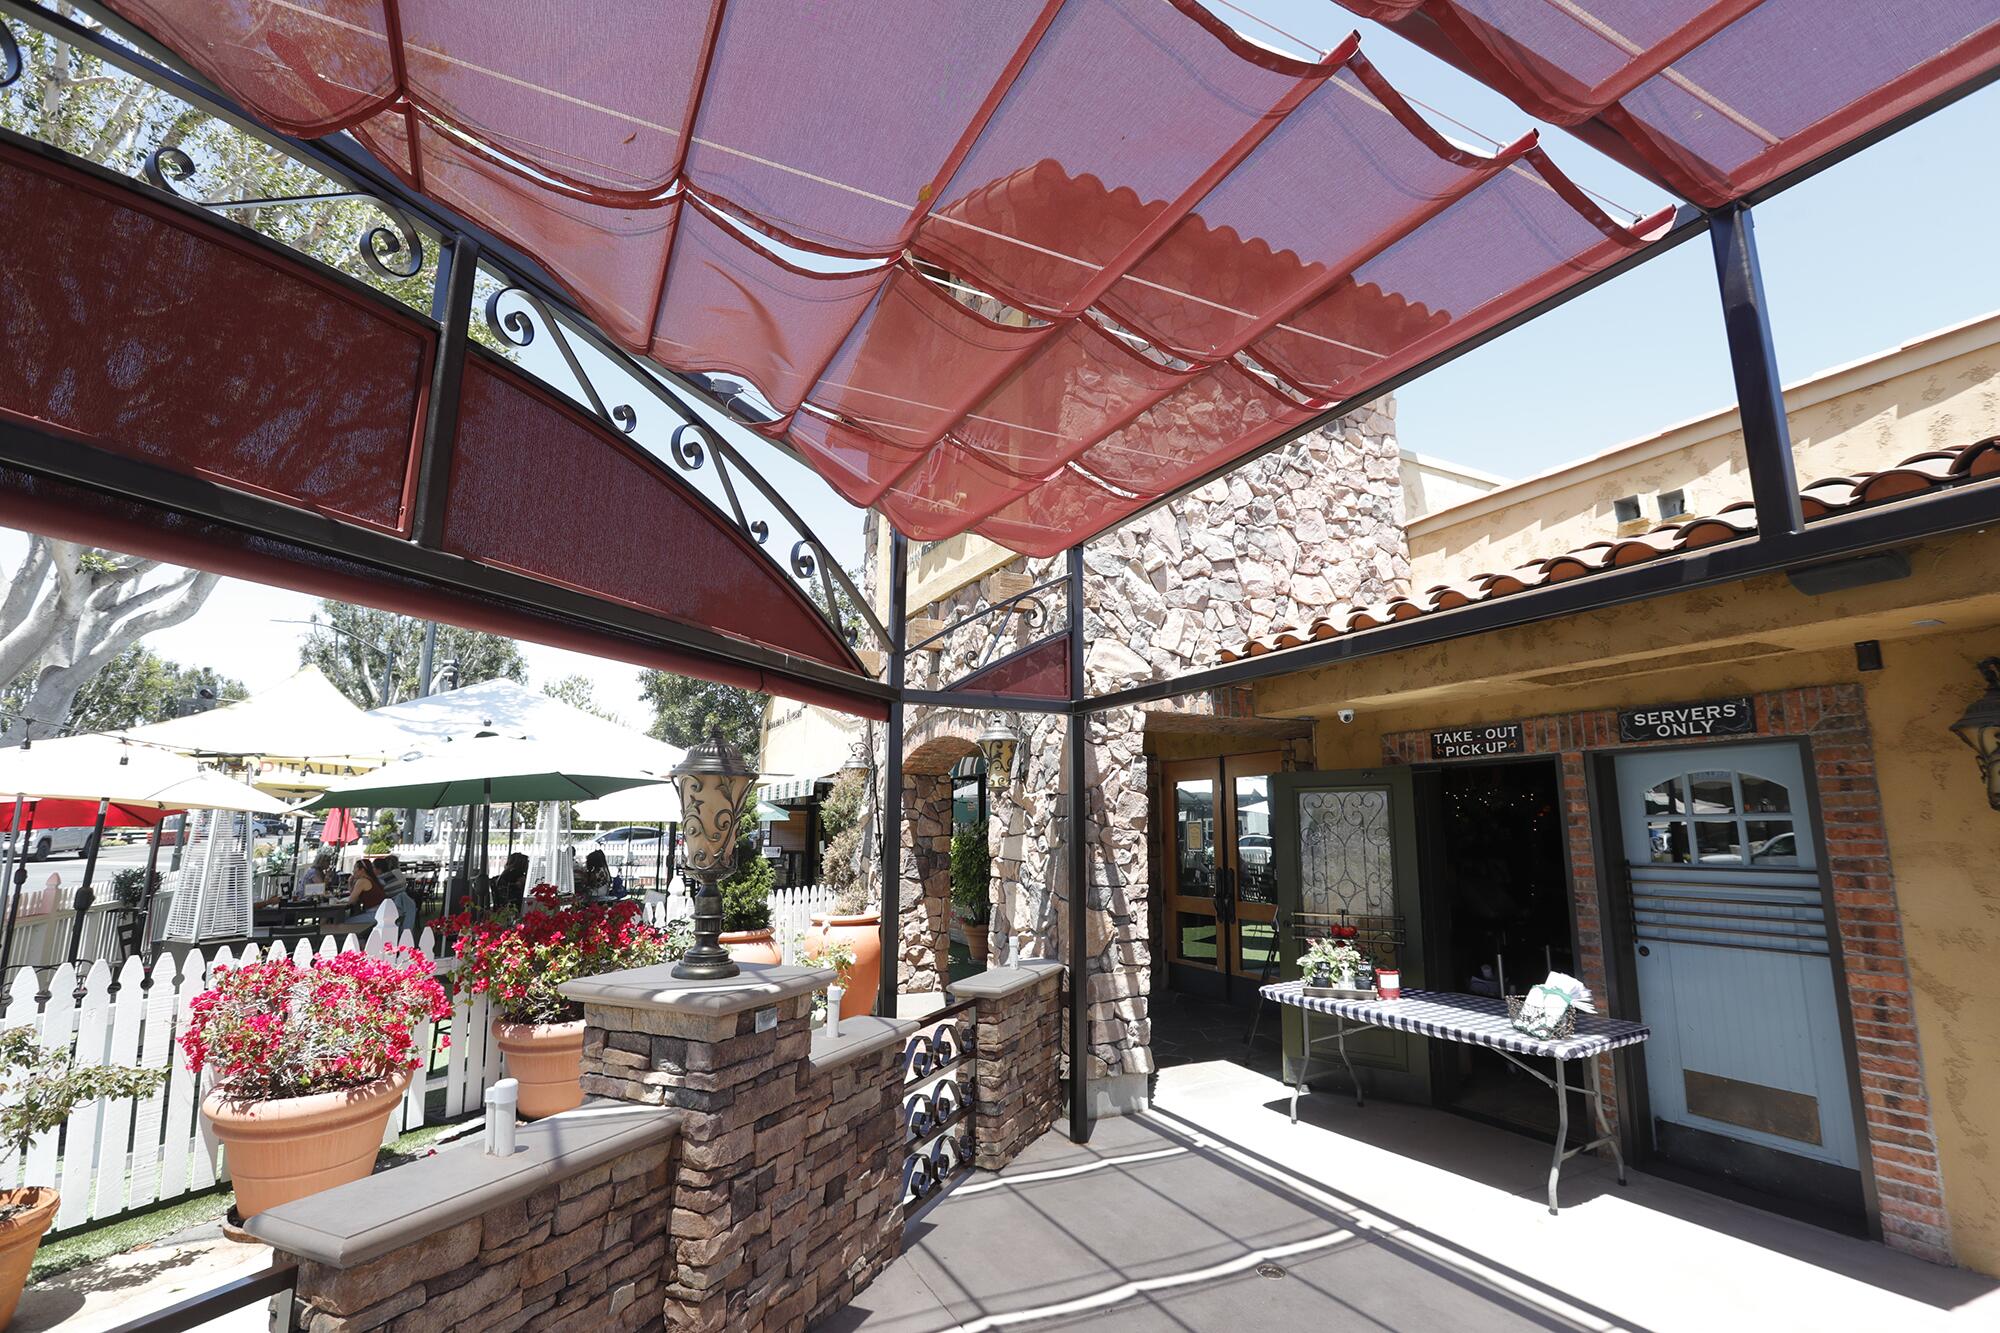 The outdoor dining and takeout space of the Roma D' Italia restaurant in Old Town Tustin.